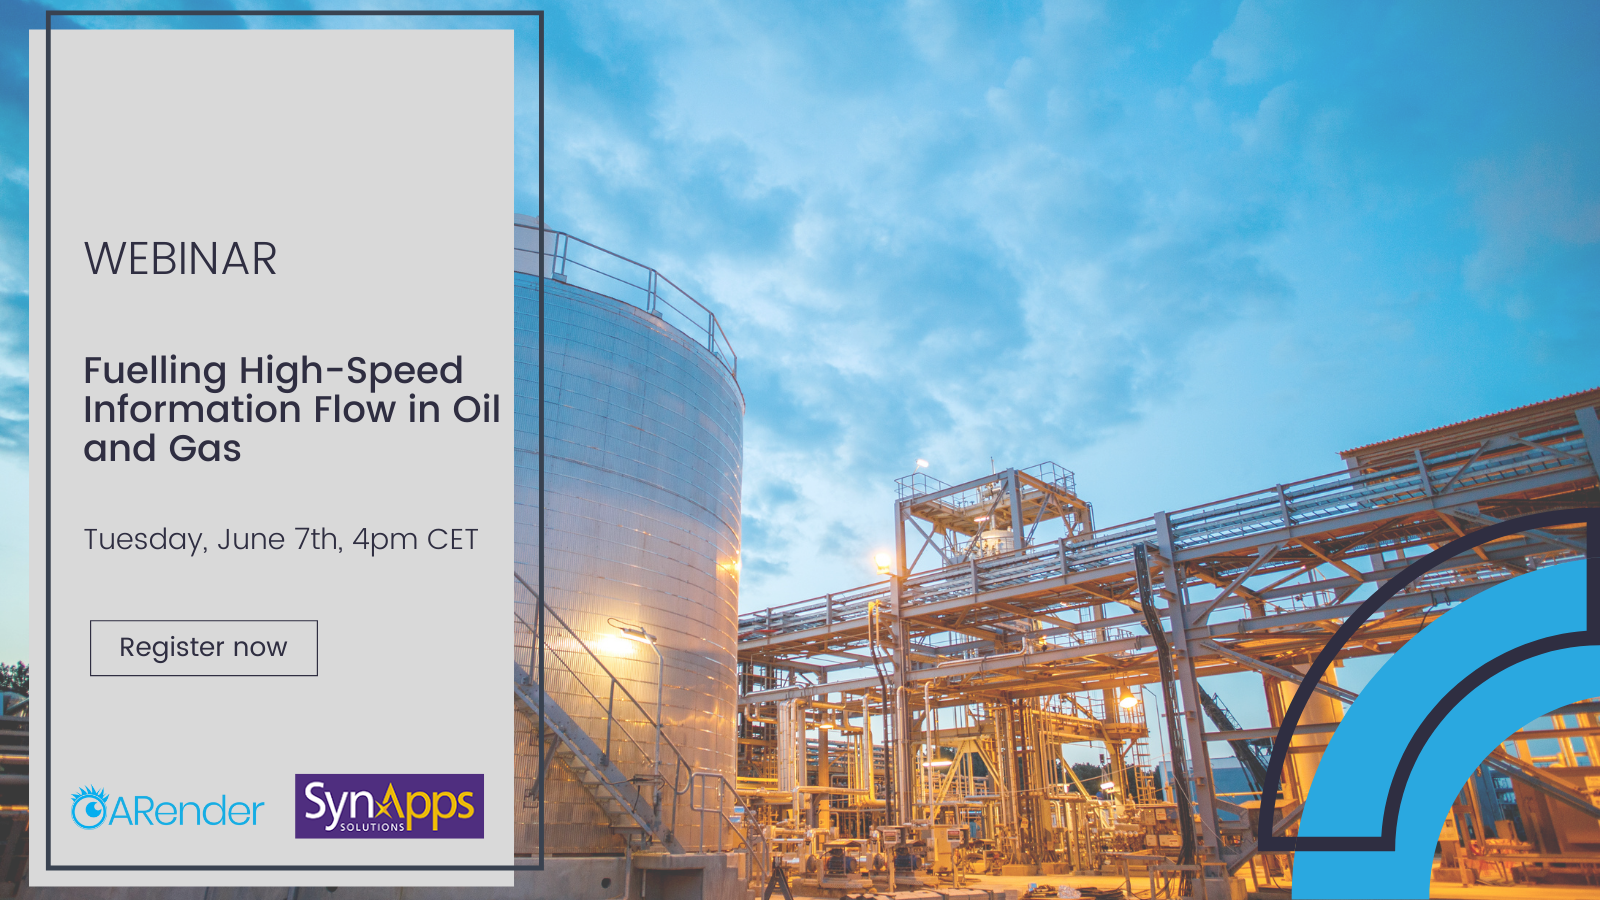 Fuelling High-Speed Information Flow in Oil and Gas - Webinar